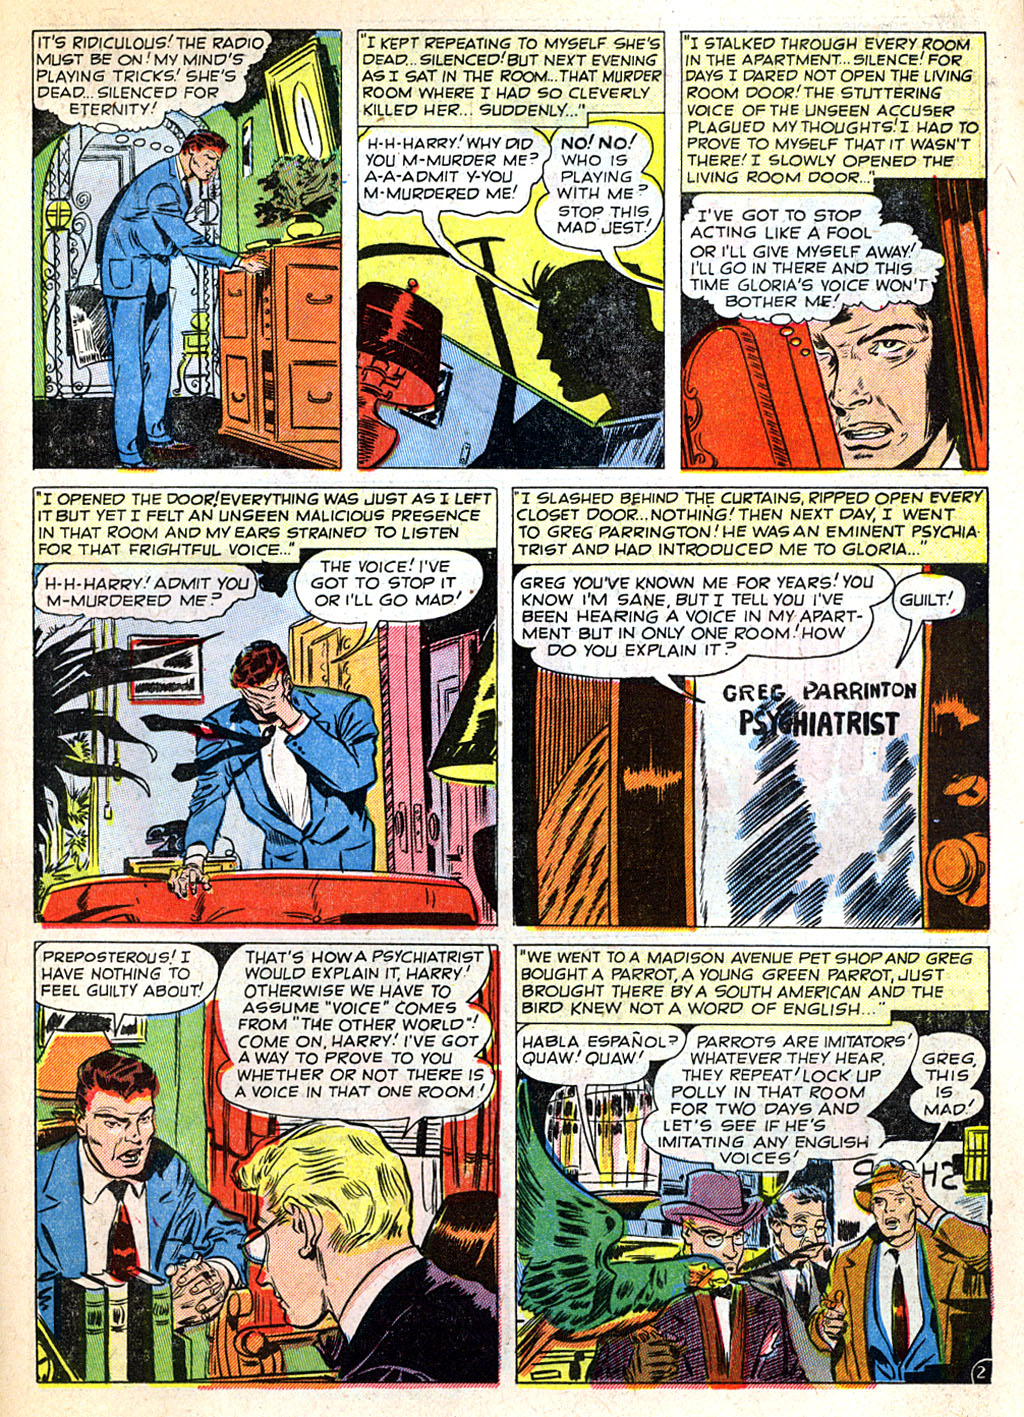 Marvel Tales (1949) 101 Page 22